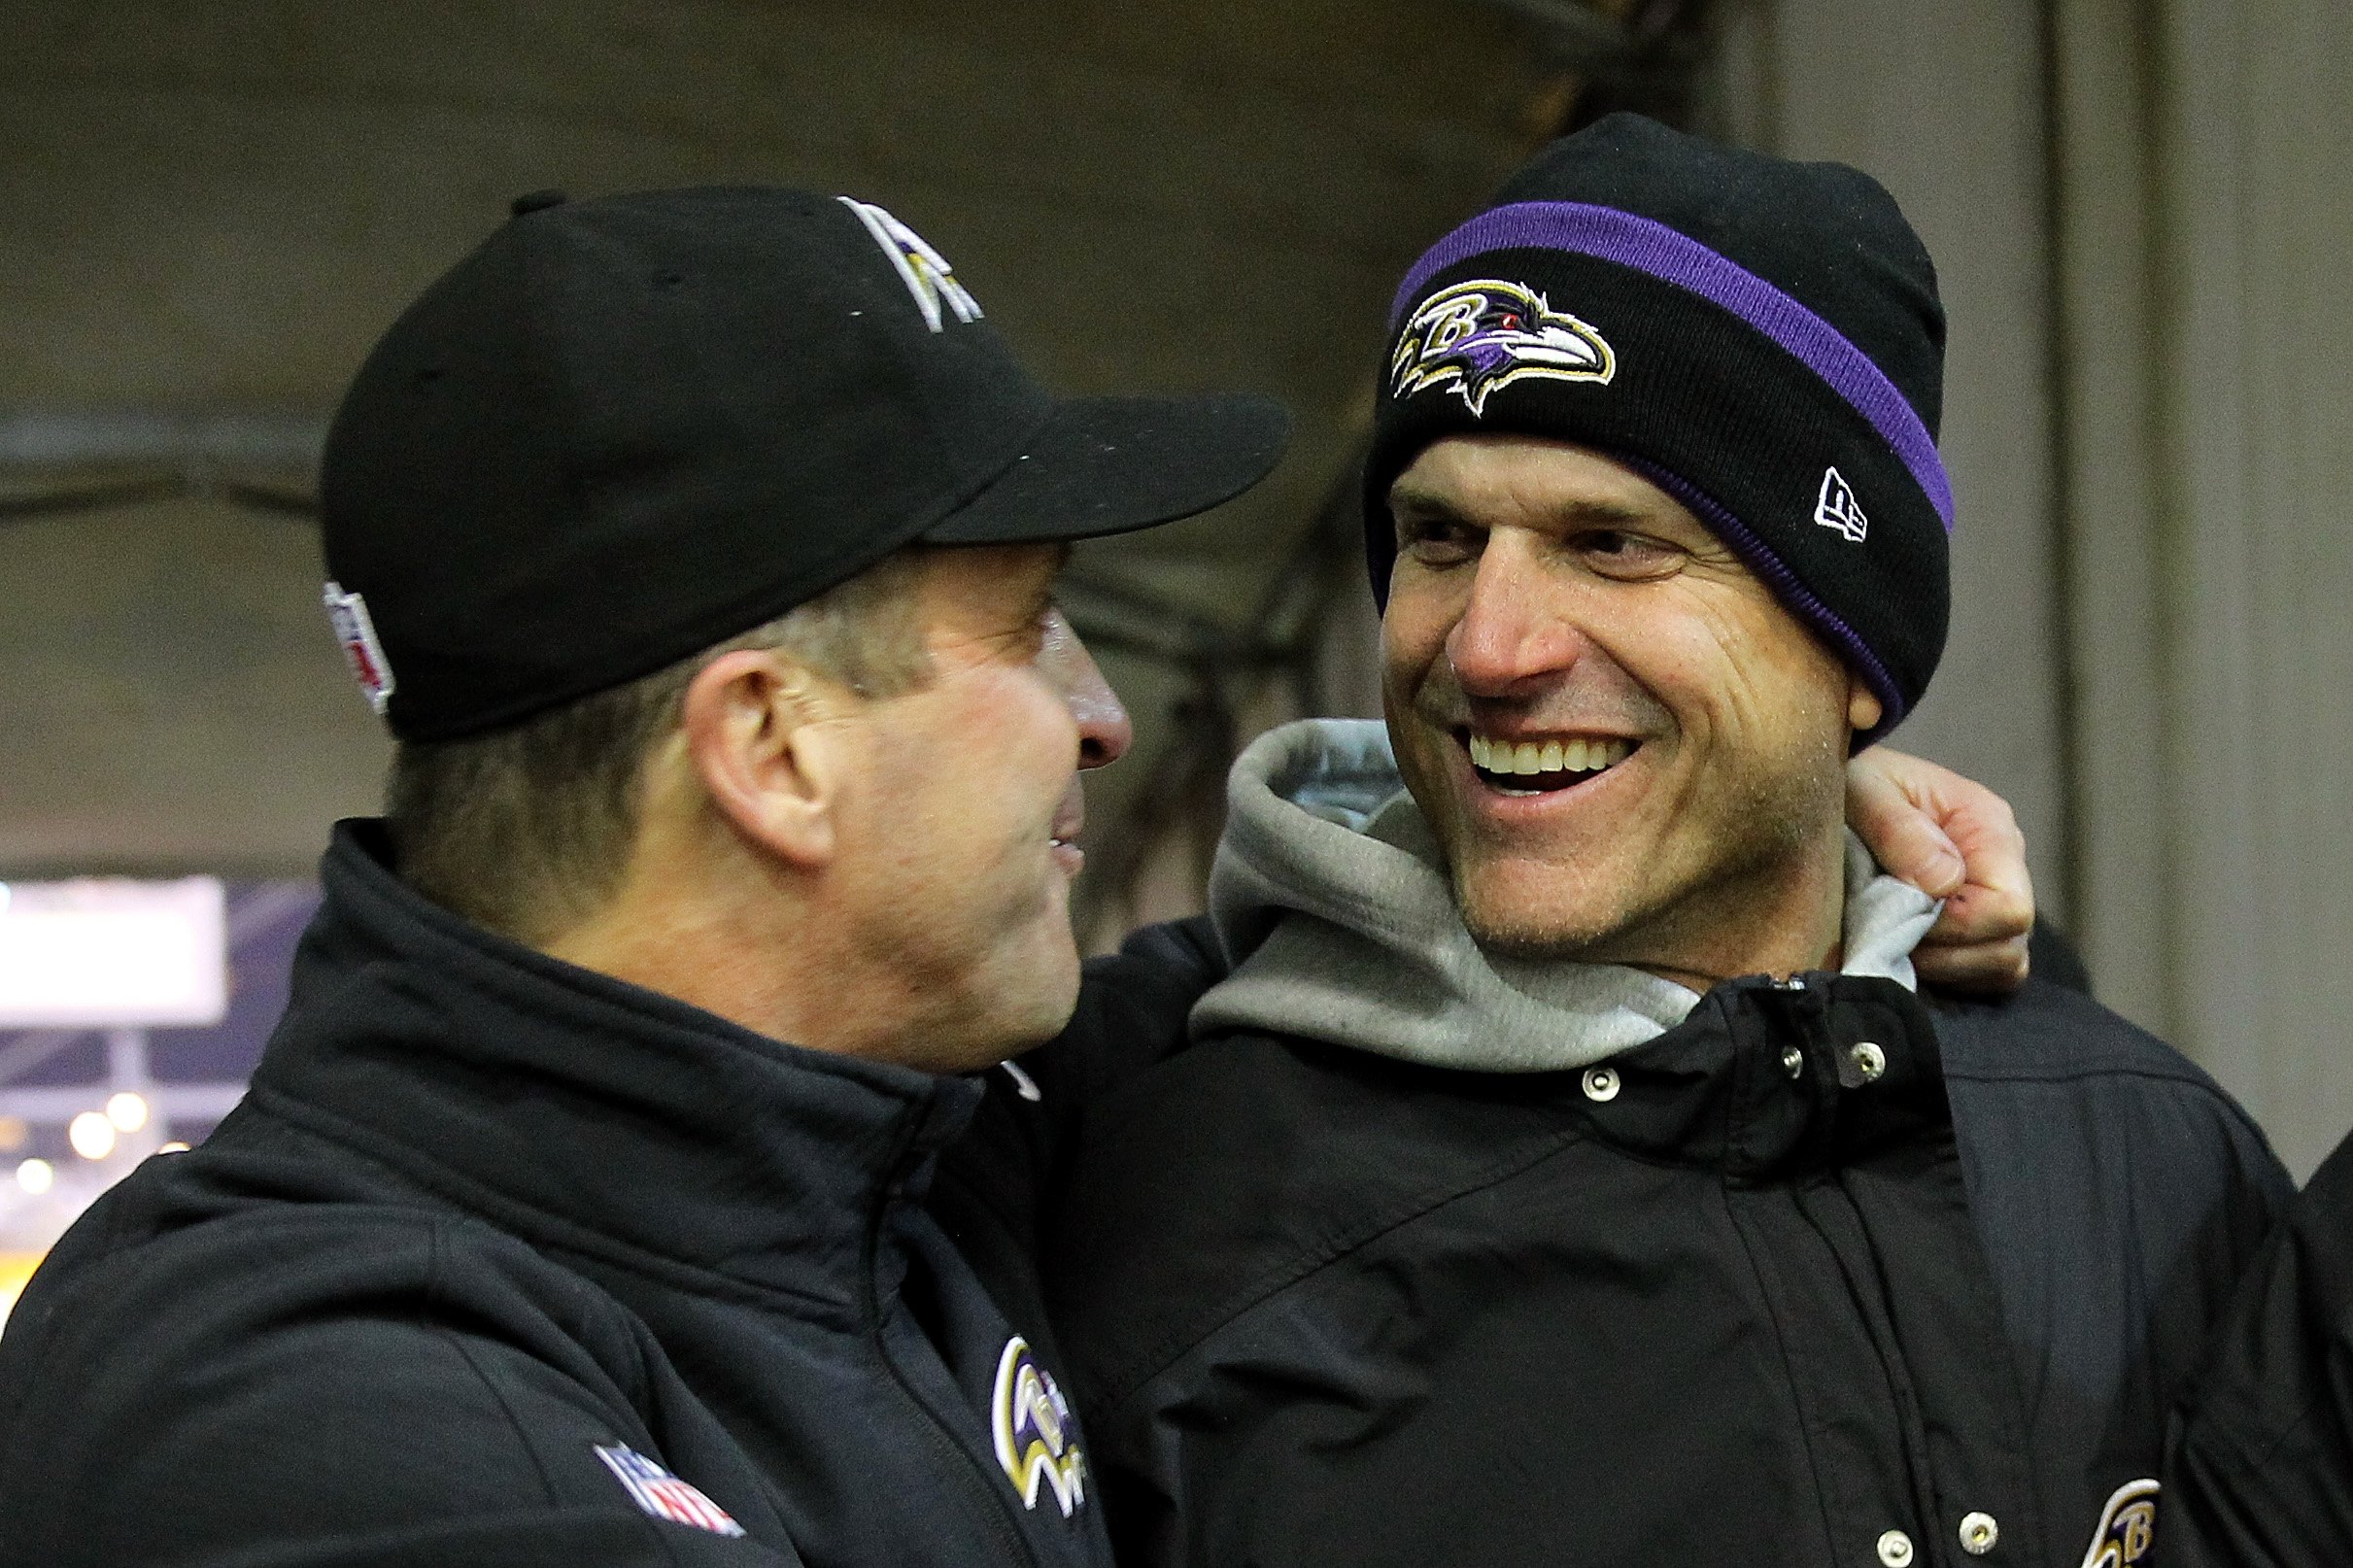 Michigan coach Jim Harbaugh (R) celebrates with his brother, head coach John Harbaugh (L) of the Baltimore Ravens after the Ravens defeated the Pittsburgh Steelers 30-17 in their AFC Wild Card game at Heinz Field, on January 3, 2015, in Pittsburgh, Pennsylvania. | Source: Getty Images